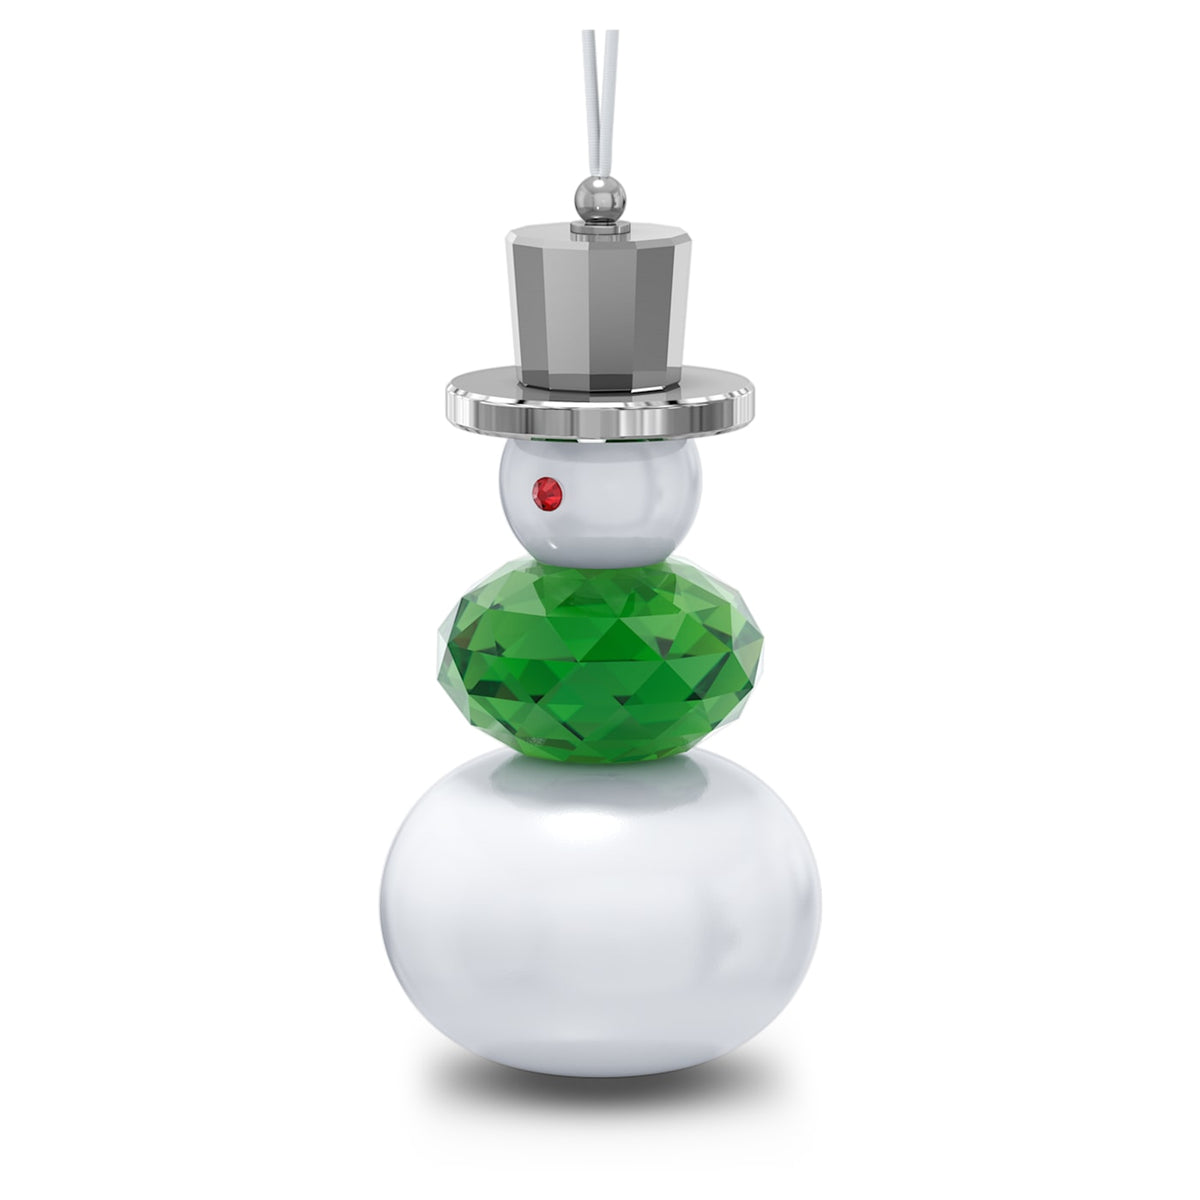 Swarovski Holiday Cheers: Ornament Snowman 5596388 - Limited Edition- Discontinued